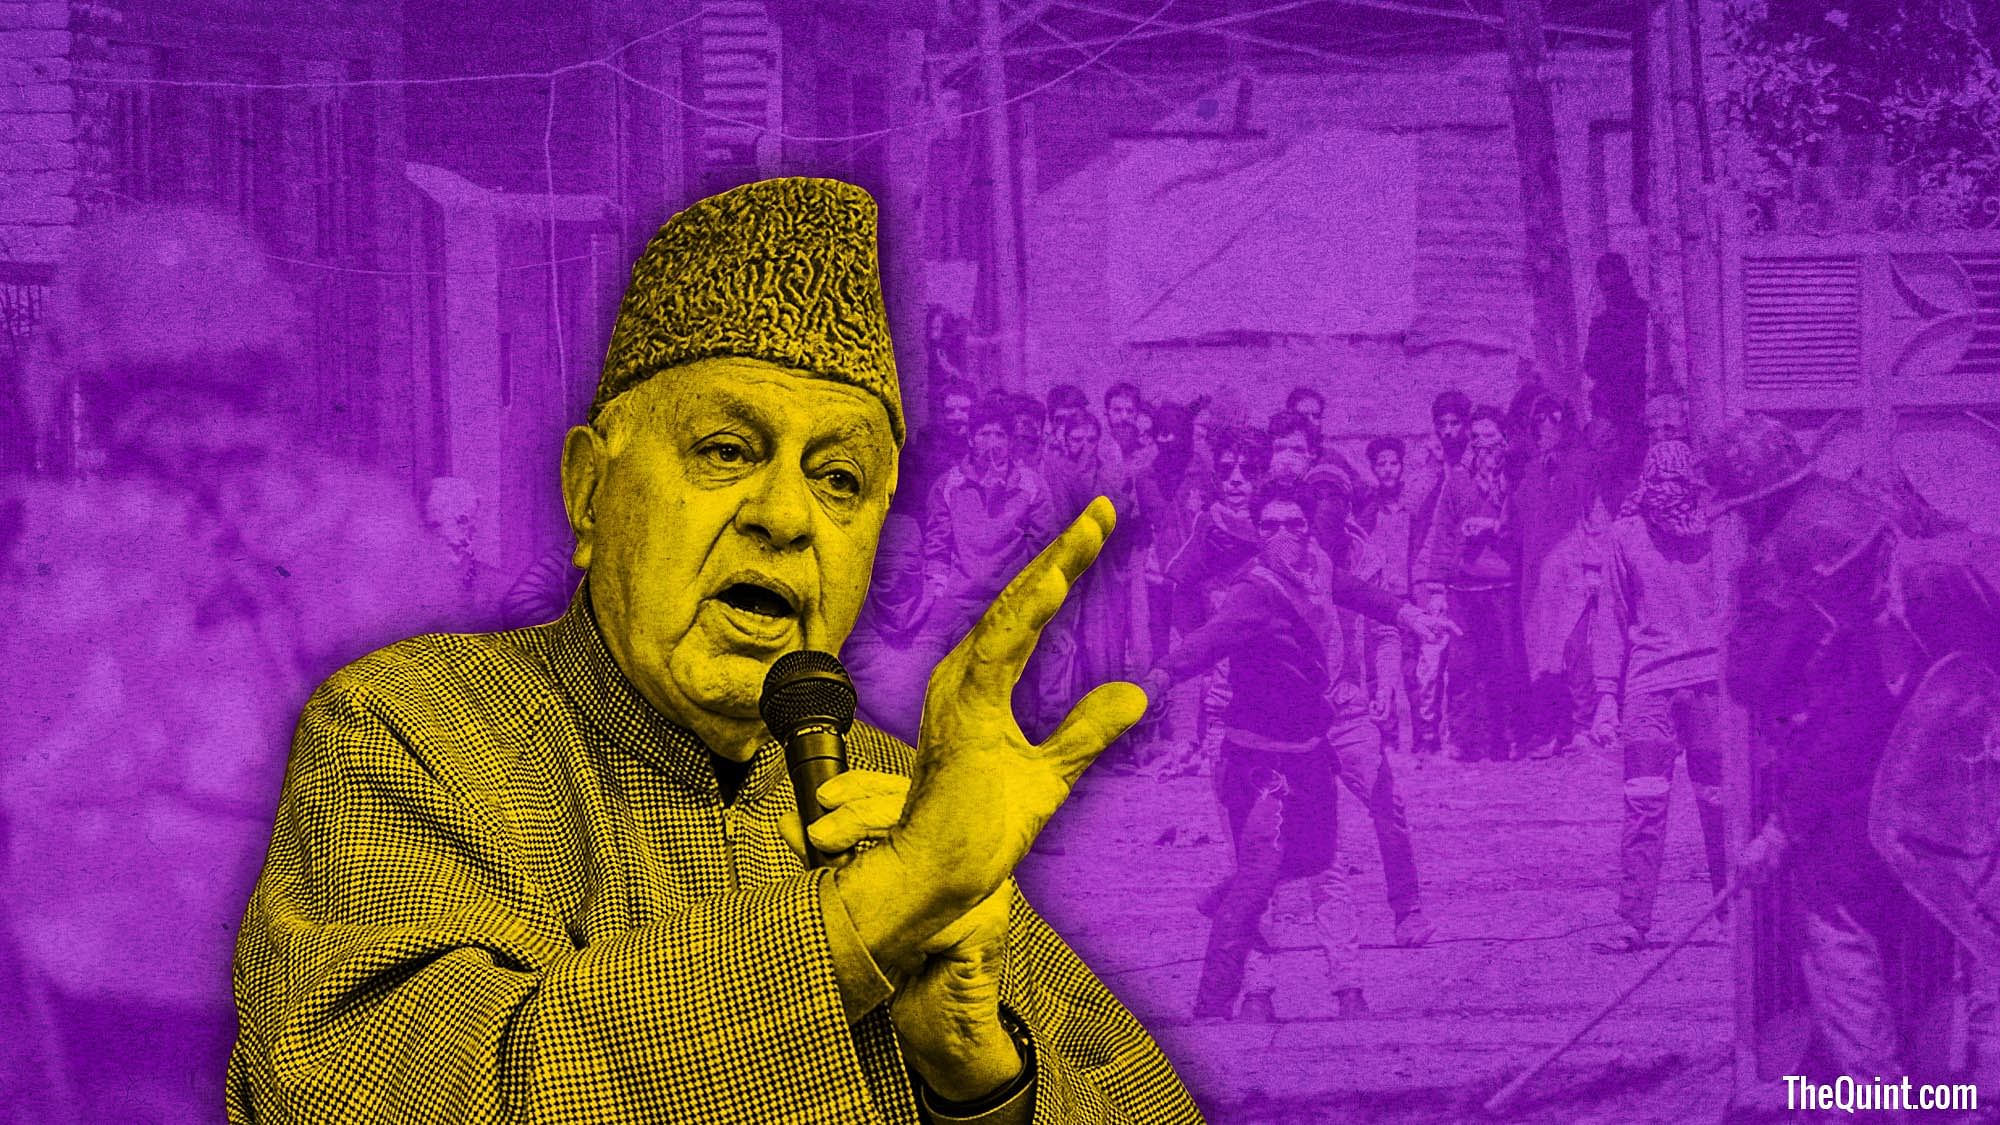 Former chief minister Farooq Abdullah has been detained under Jammu and Kashmir’s PSA.